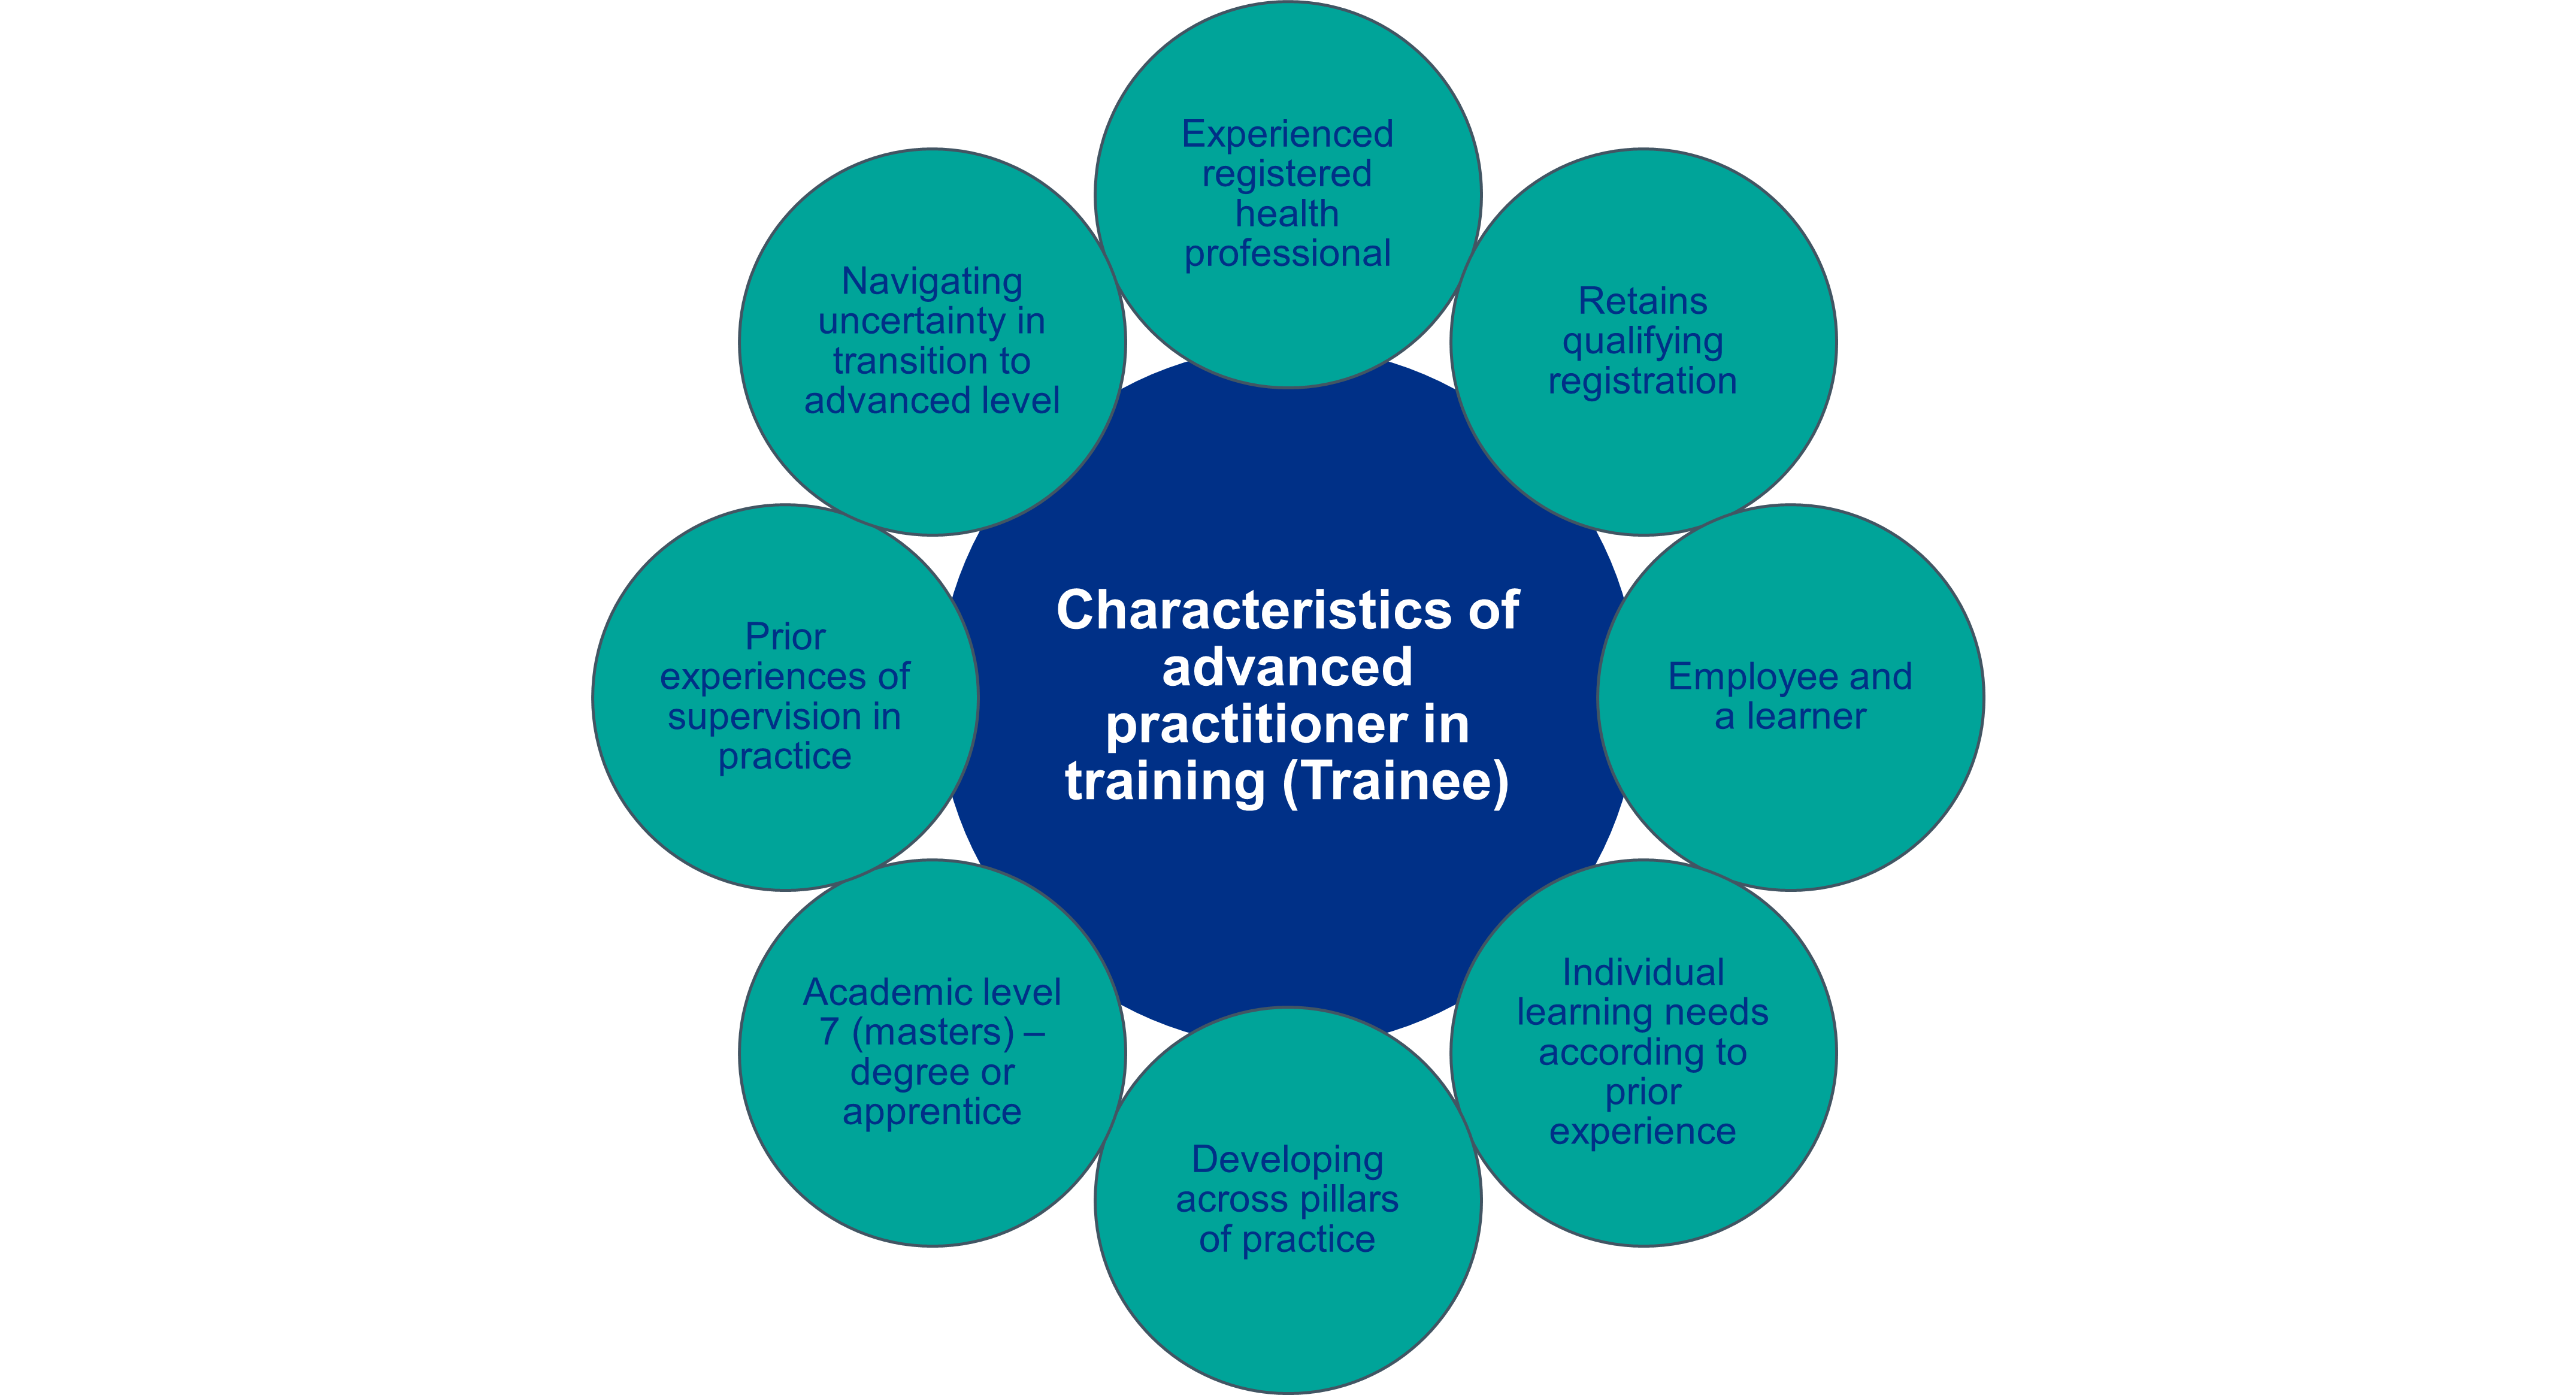 Characteristics of advanced practitioner in training (trainee)
	Experienced registered health professional
	Retains qualifying  registration
	Employee and a learner
	Individual learning needs according to prior experience
	Developing across pillars of practice
	Academic level 7 (masters) –degree or apprentice
	Prior experiences of supervision in practice
	Navigating uncertainty in transition to advanced level
